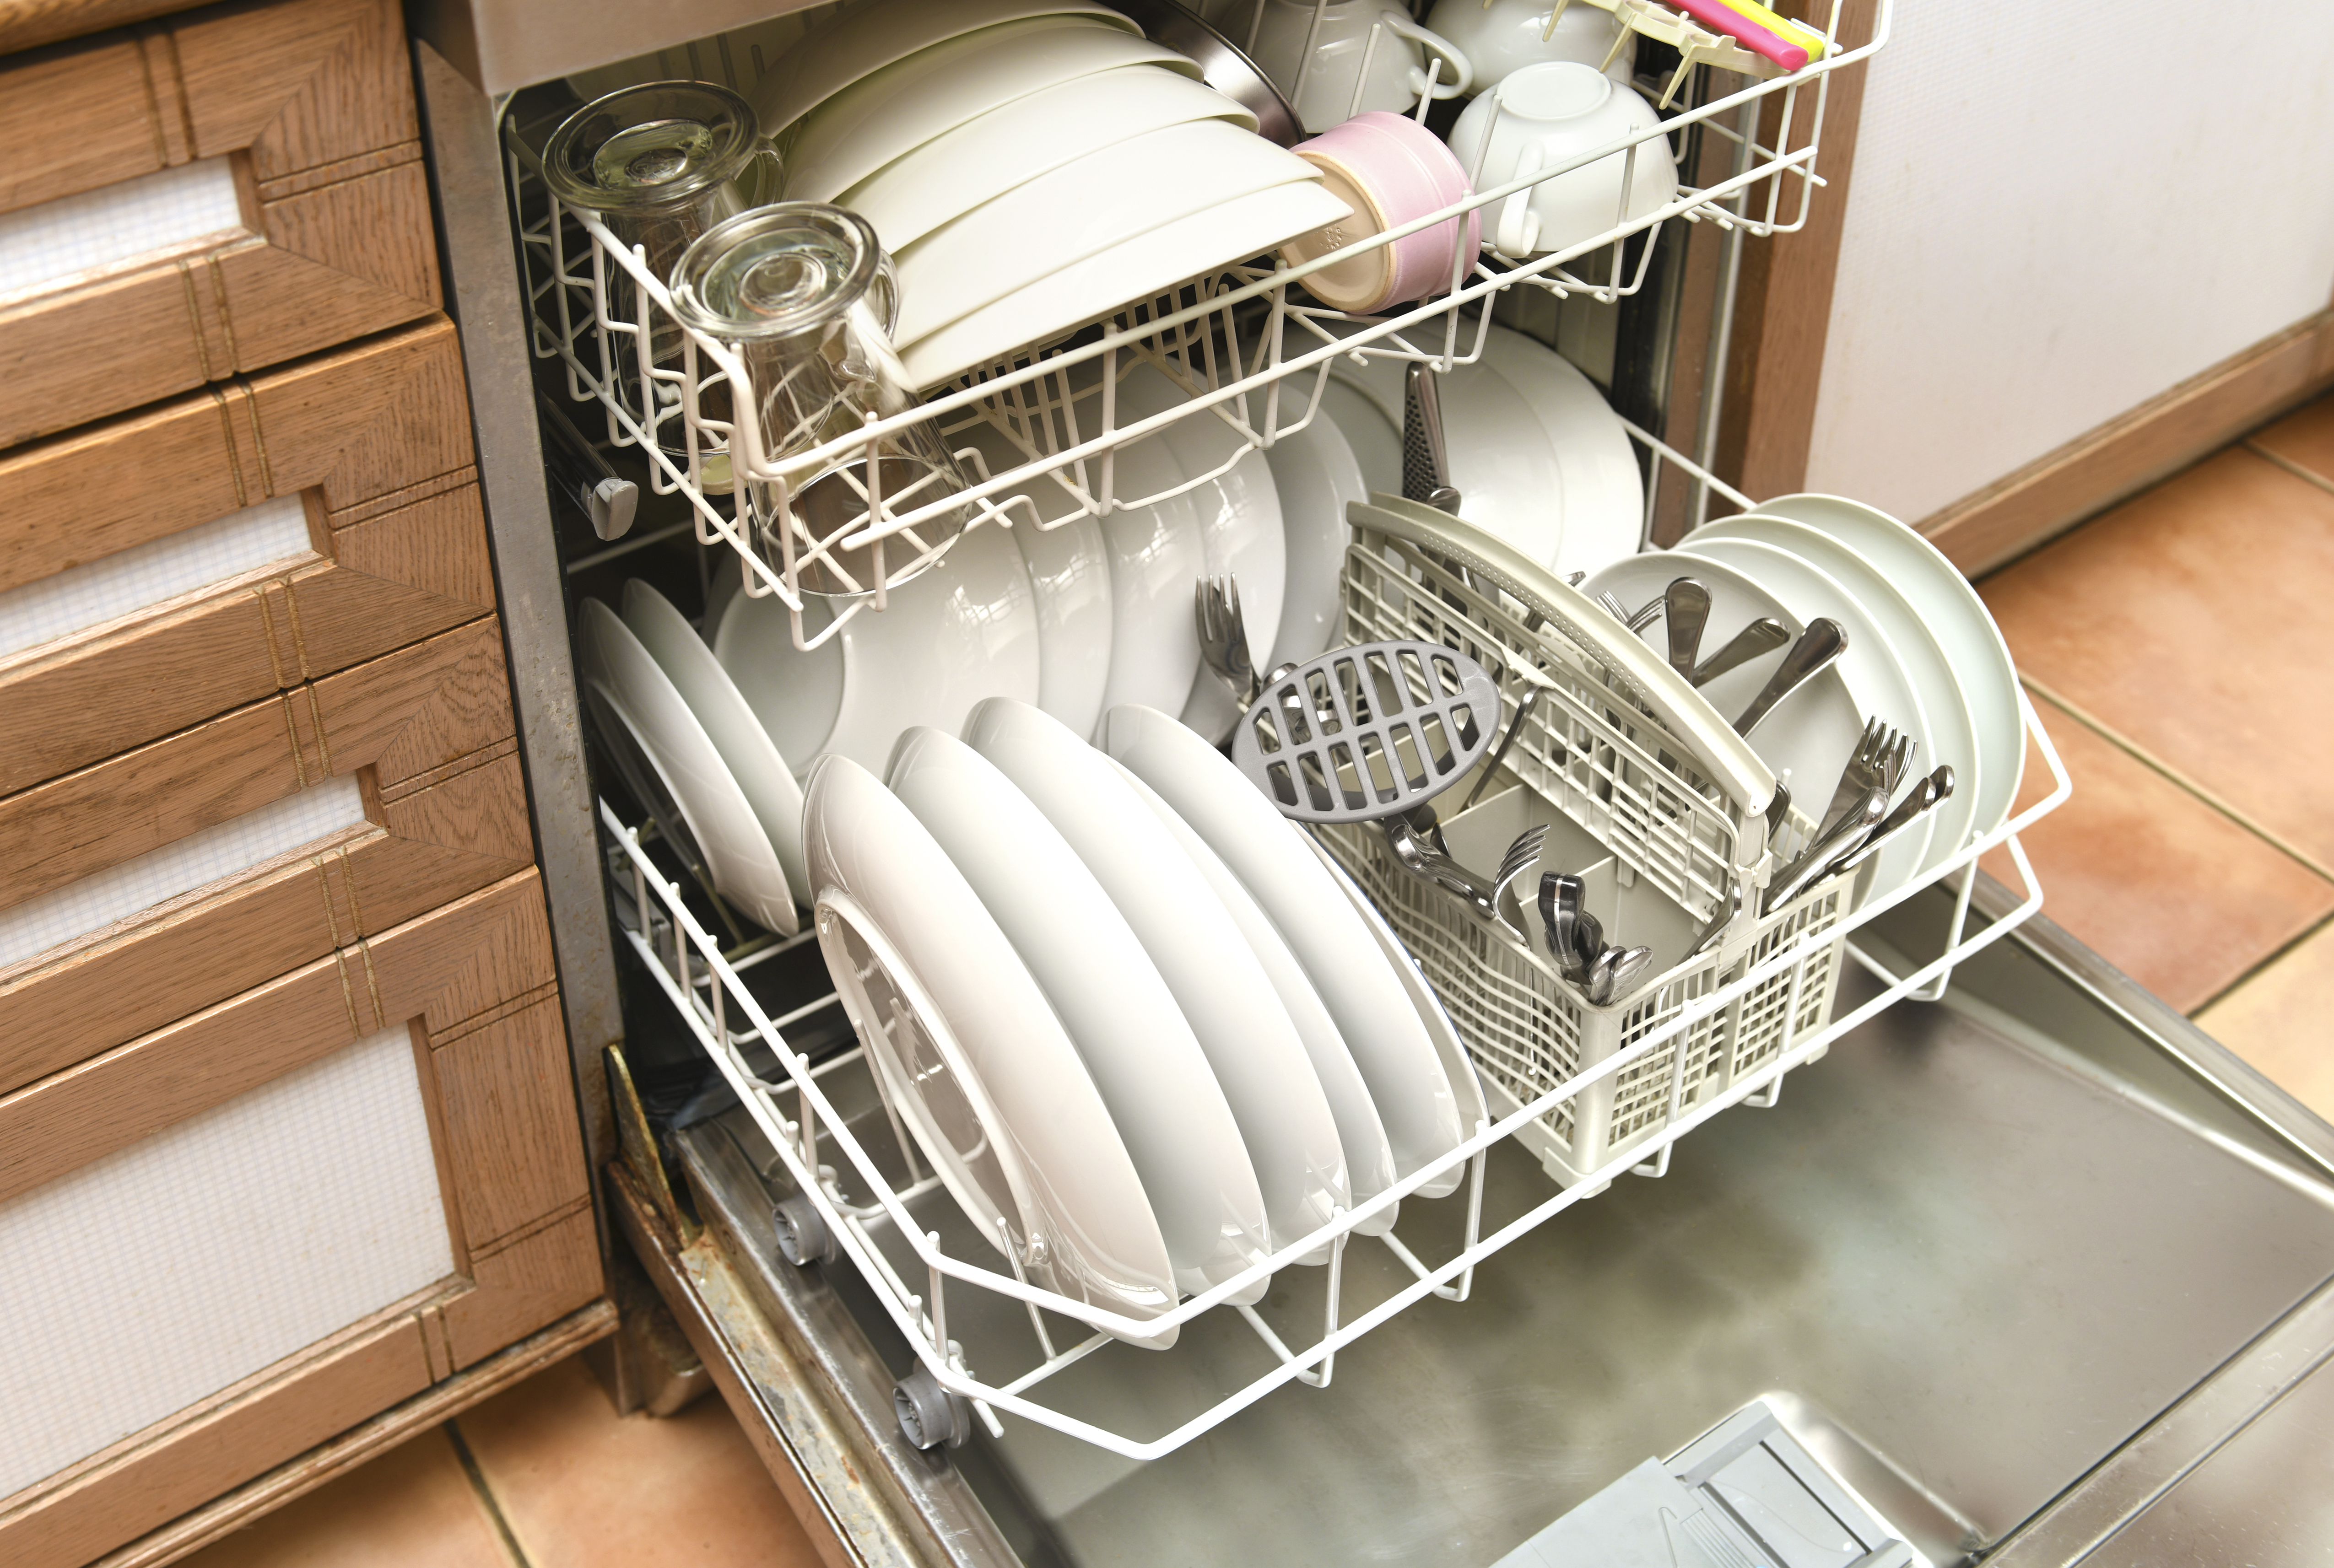 Does Using a Dishwasher Actually Save Water?